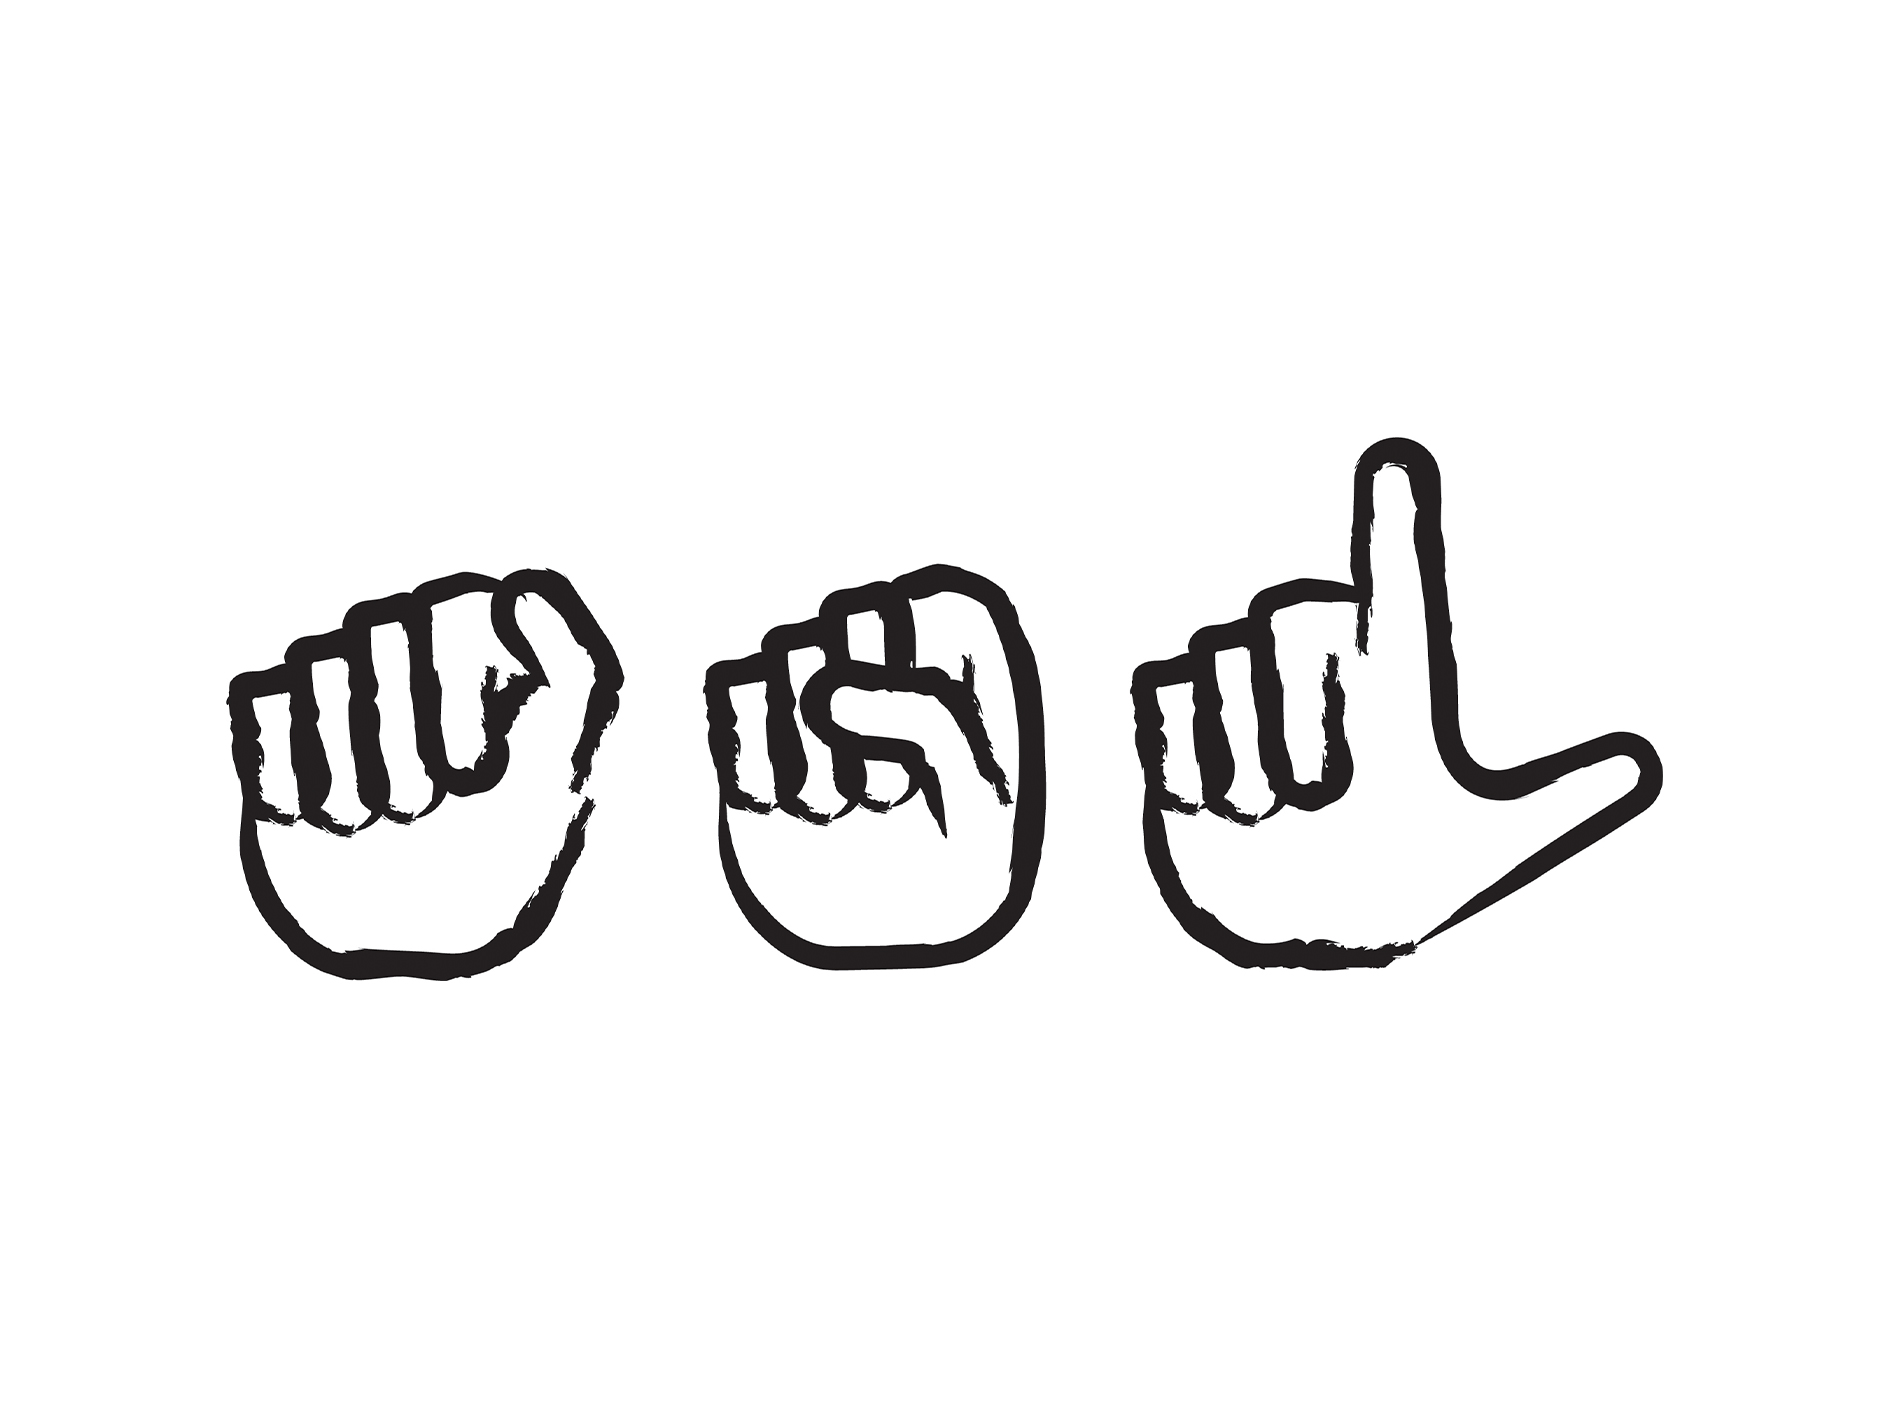 An icon representing the fingerspelling of “ASL” in American Sign Language.